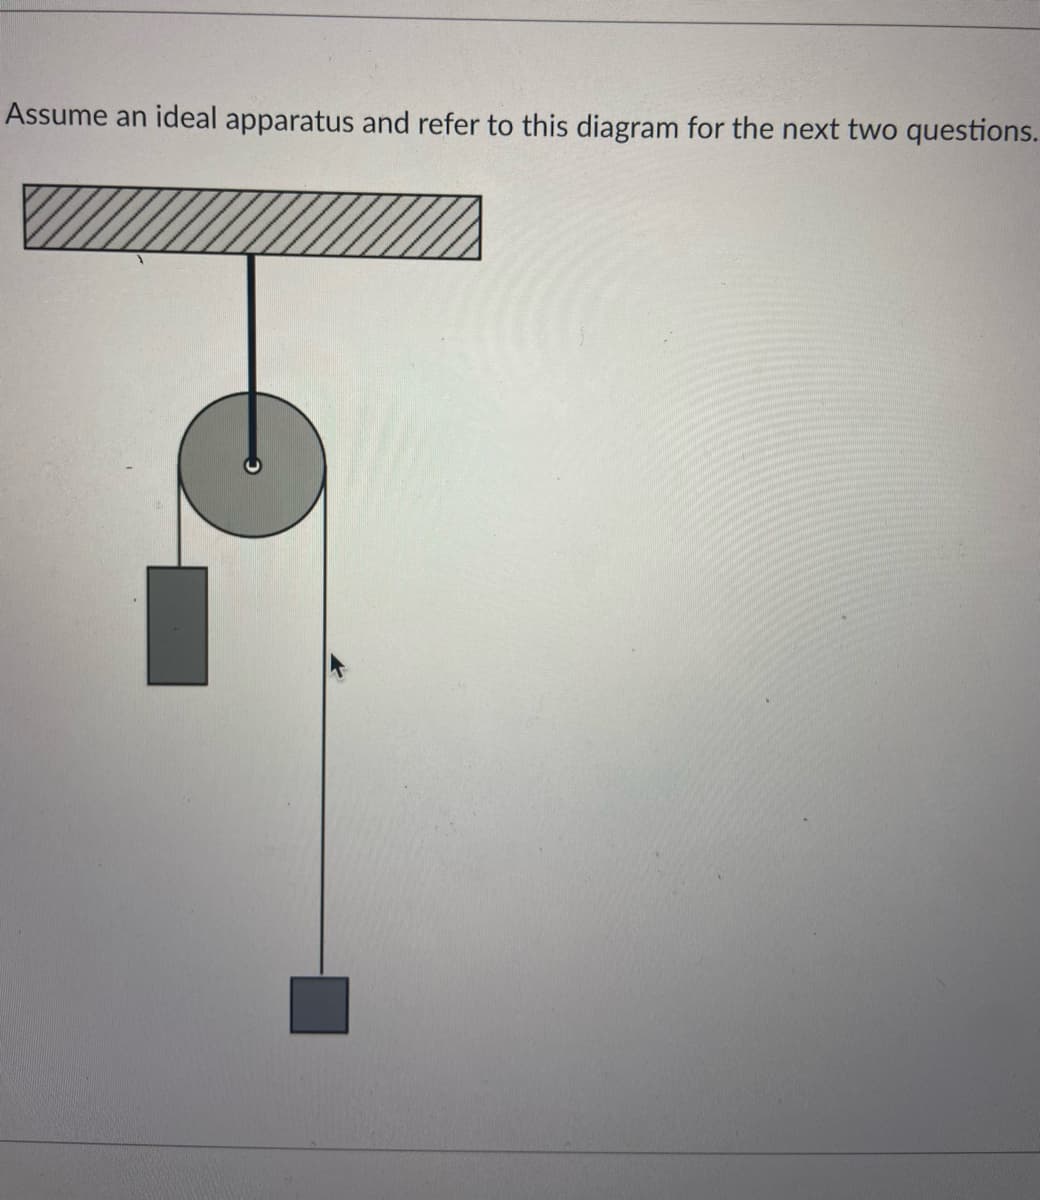 Assume an ideal apparatus and refer to this diagram for the next two questions.
